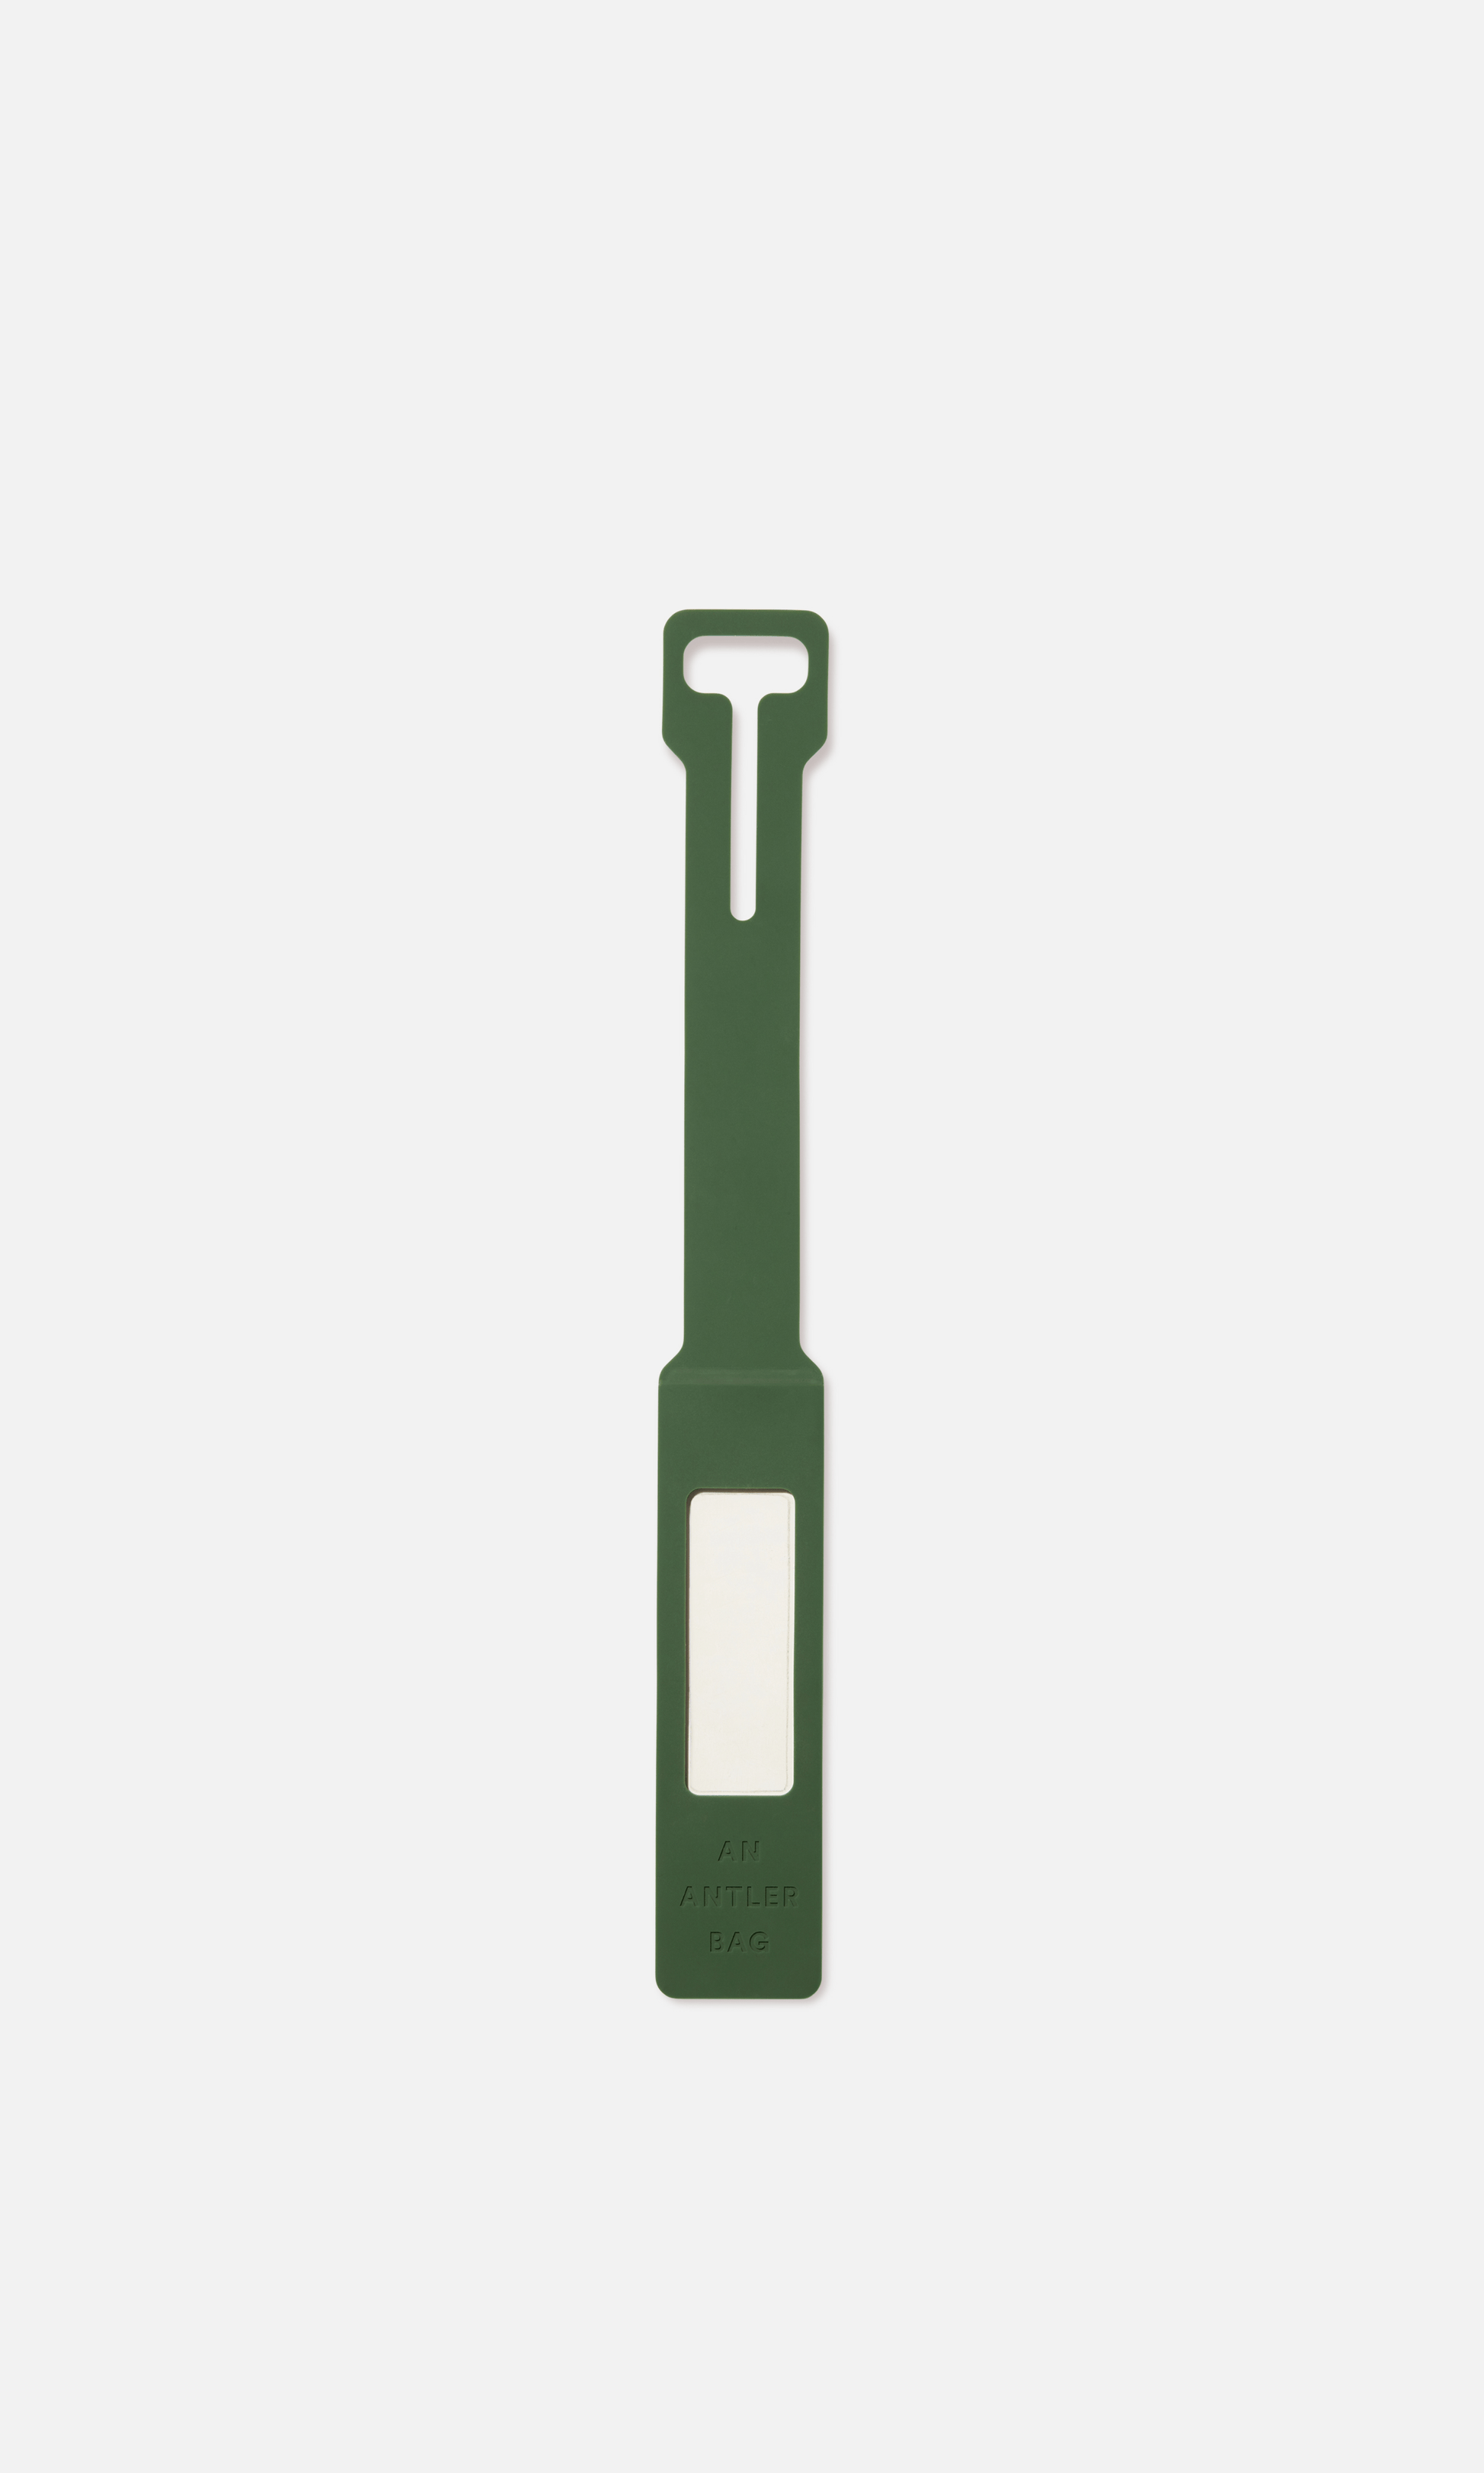 Antler Luggage -  Antler luggage tag in green - Luggage Tags